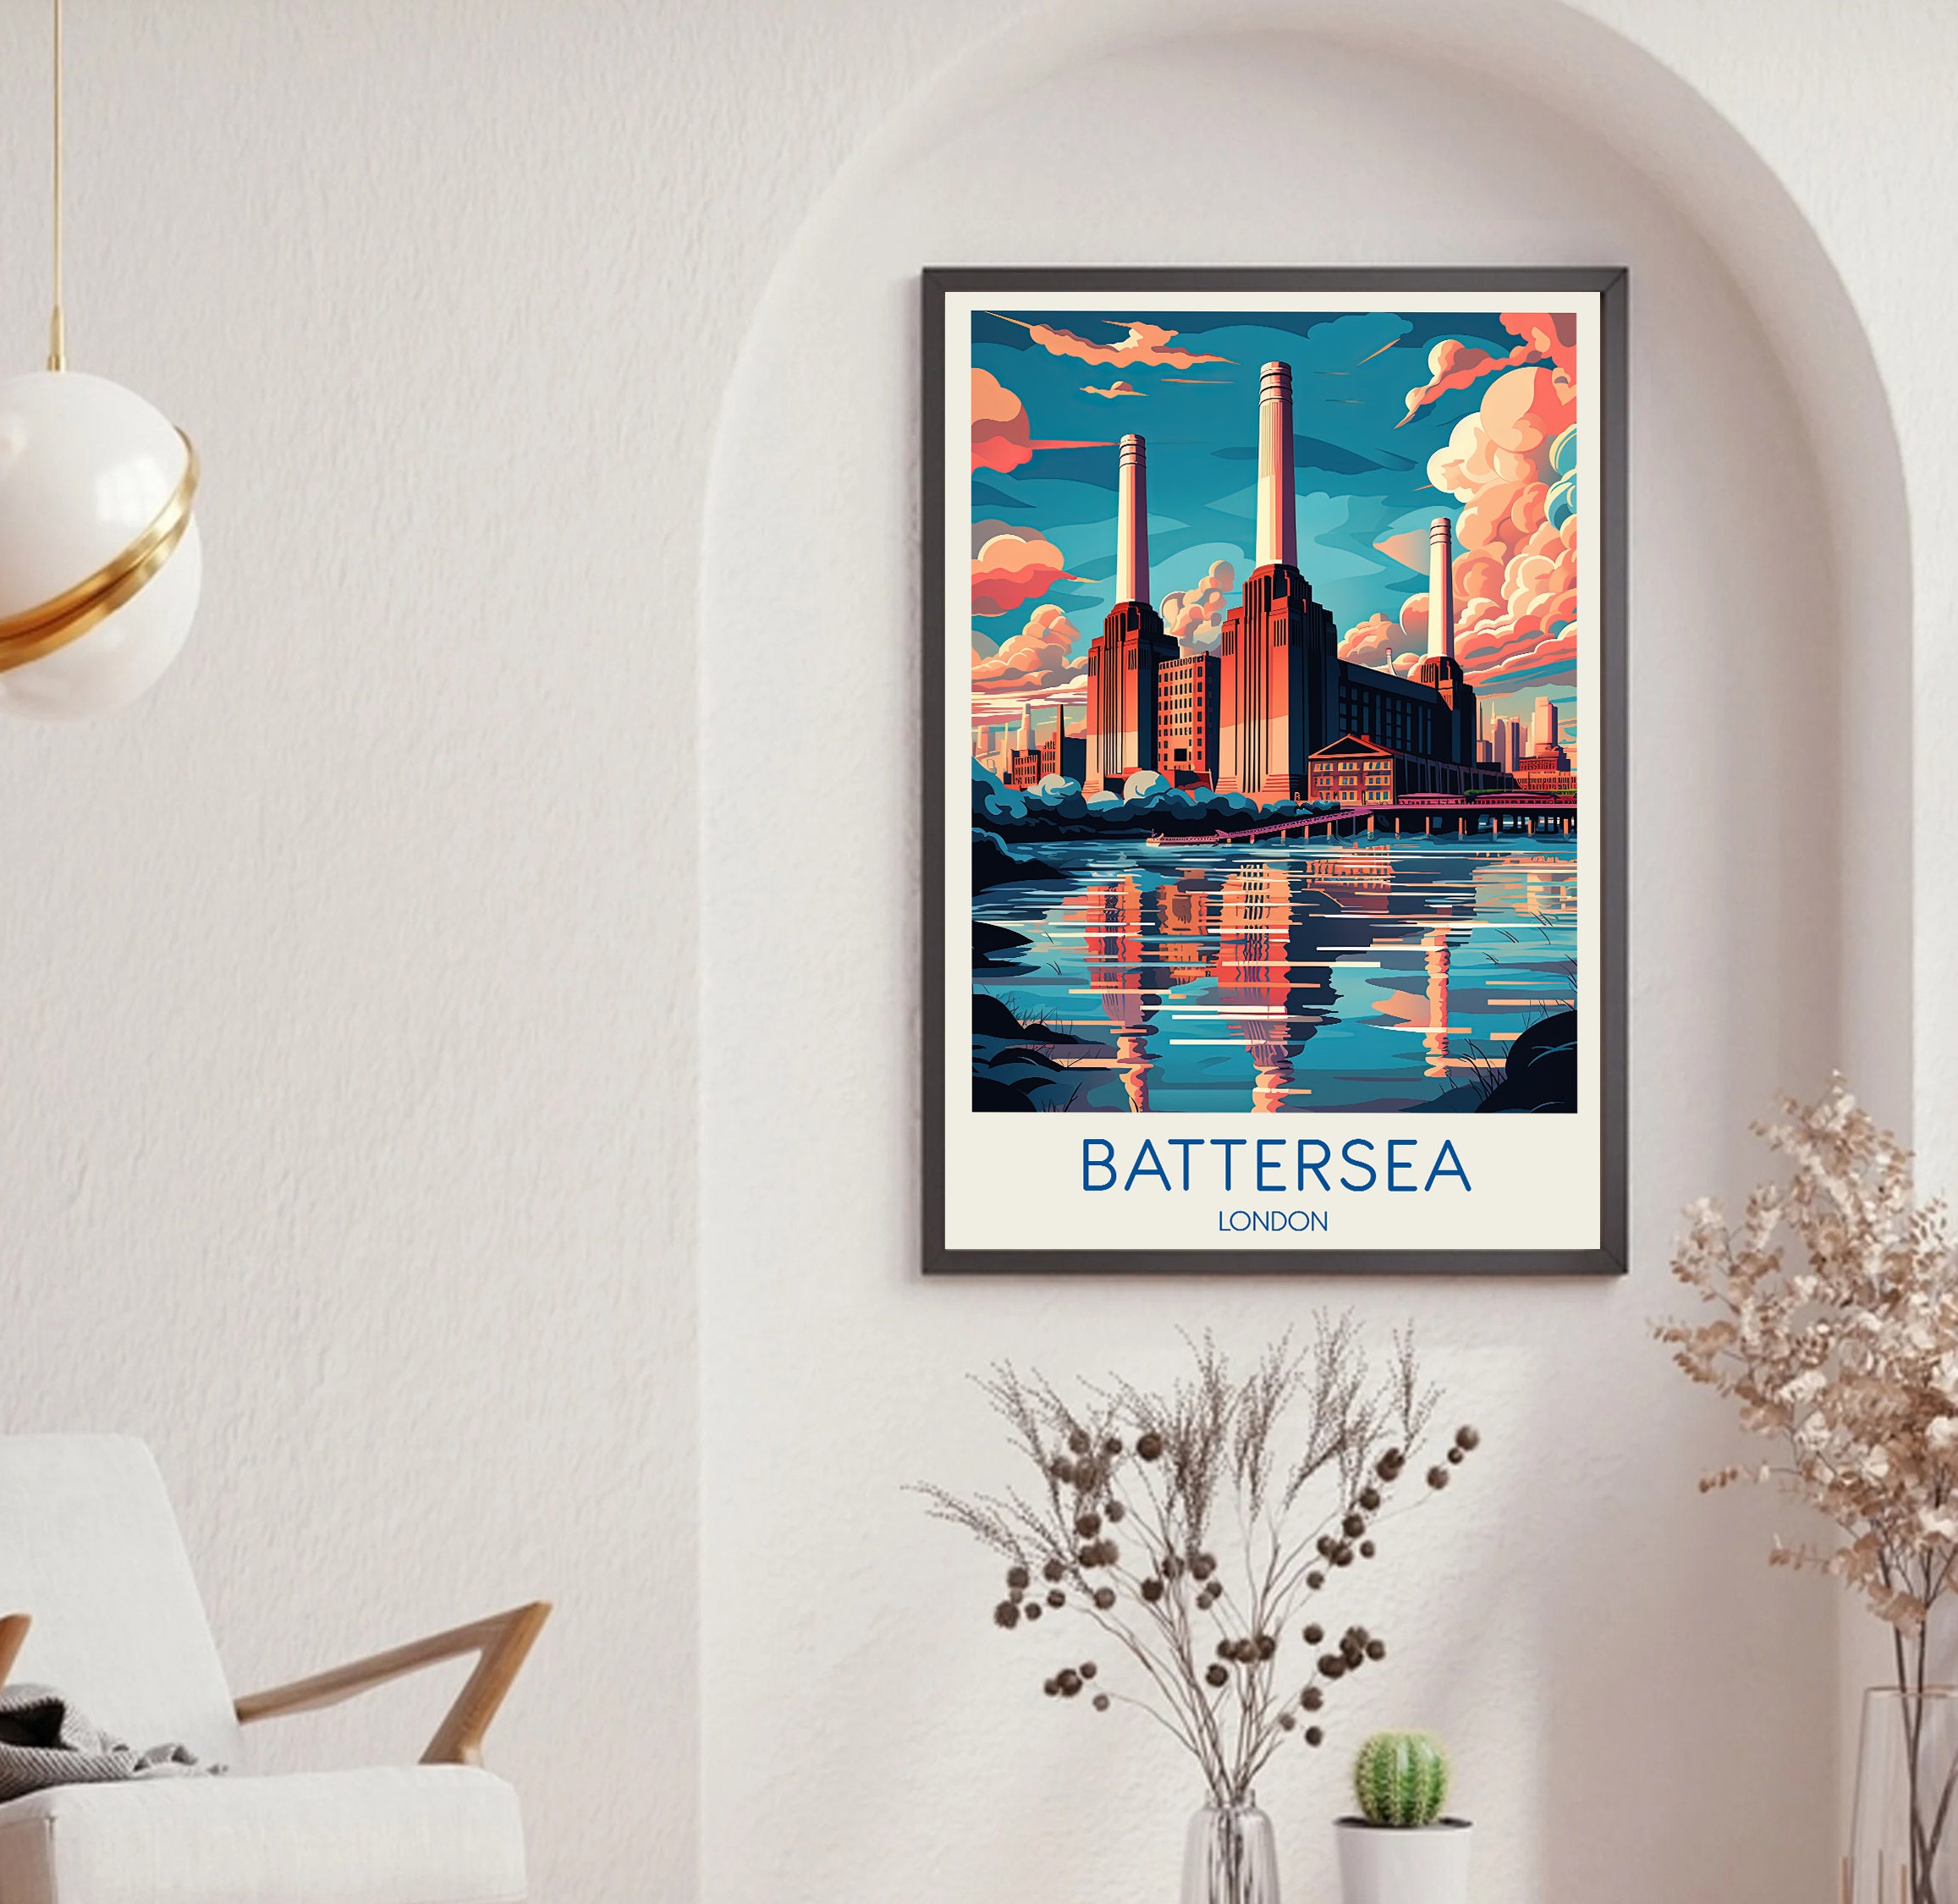 Discover Battersea Poster, London Poster, Battersea Print, Battersea Painting, Battersea Art, Illustration Art, Travel Gifts, Travel Poster,  No Frame